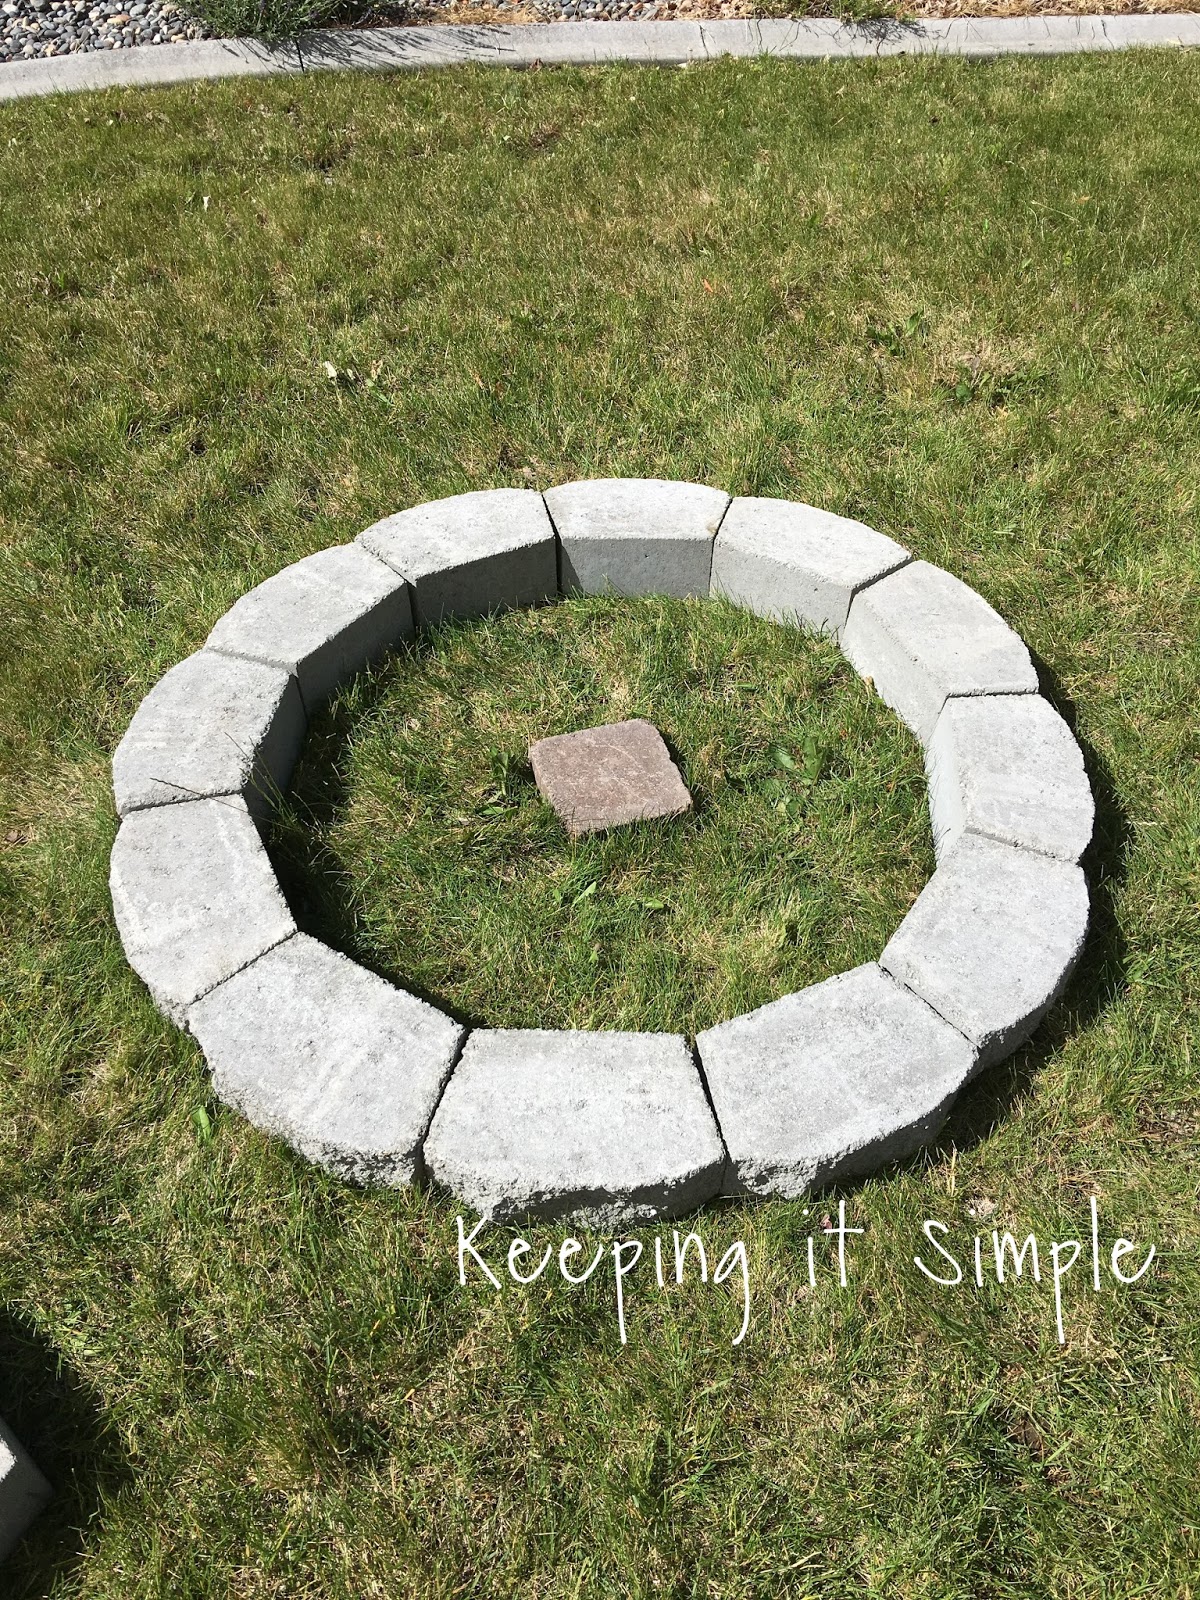 How To Build A Diy Fire Pit For Only, How To Build A Fire Pit With Pavers